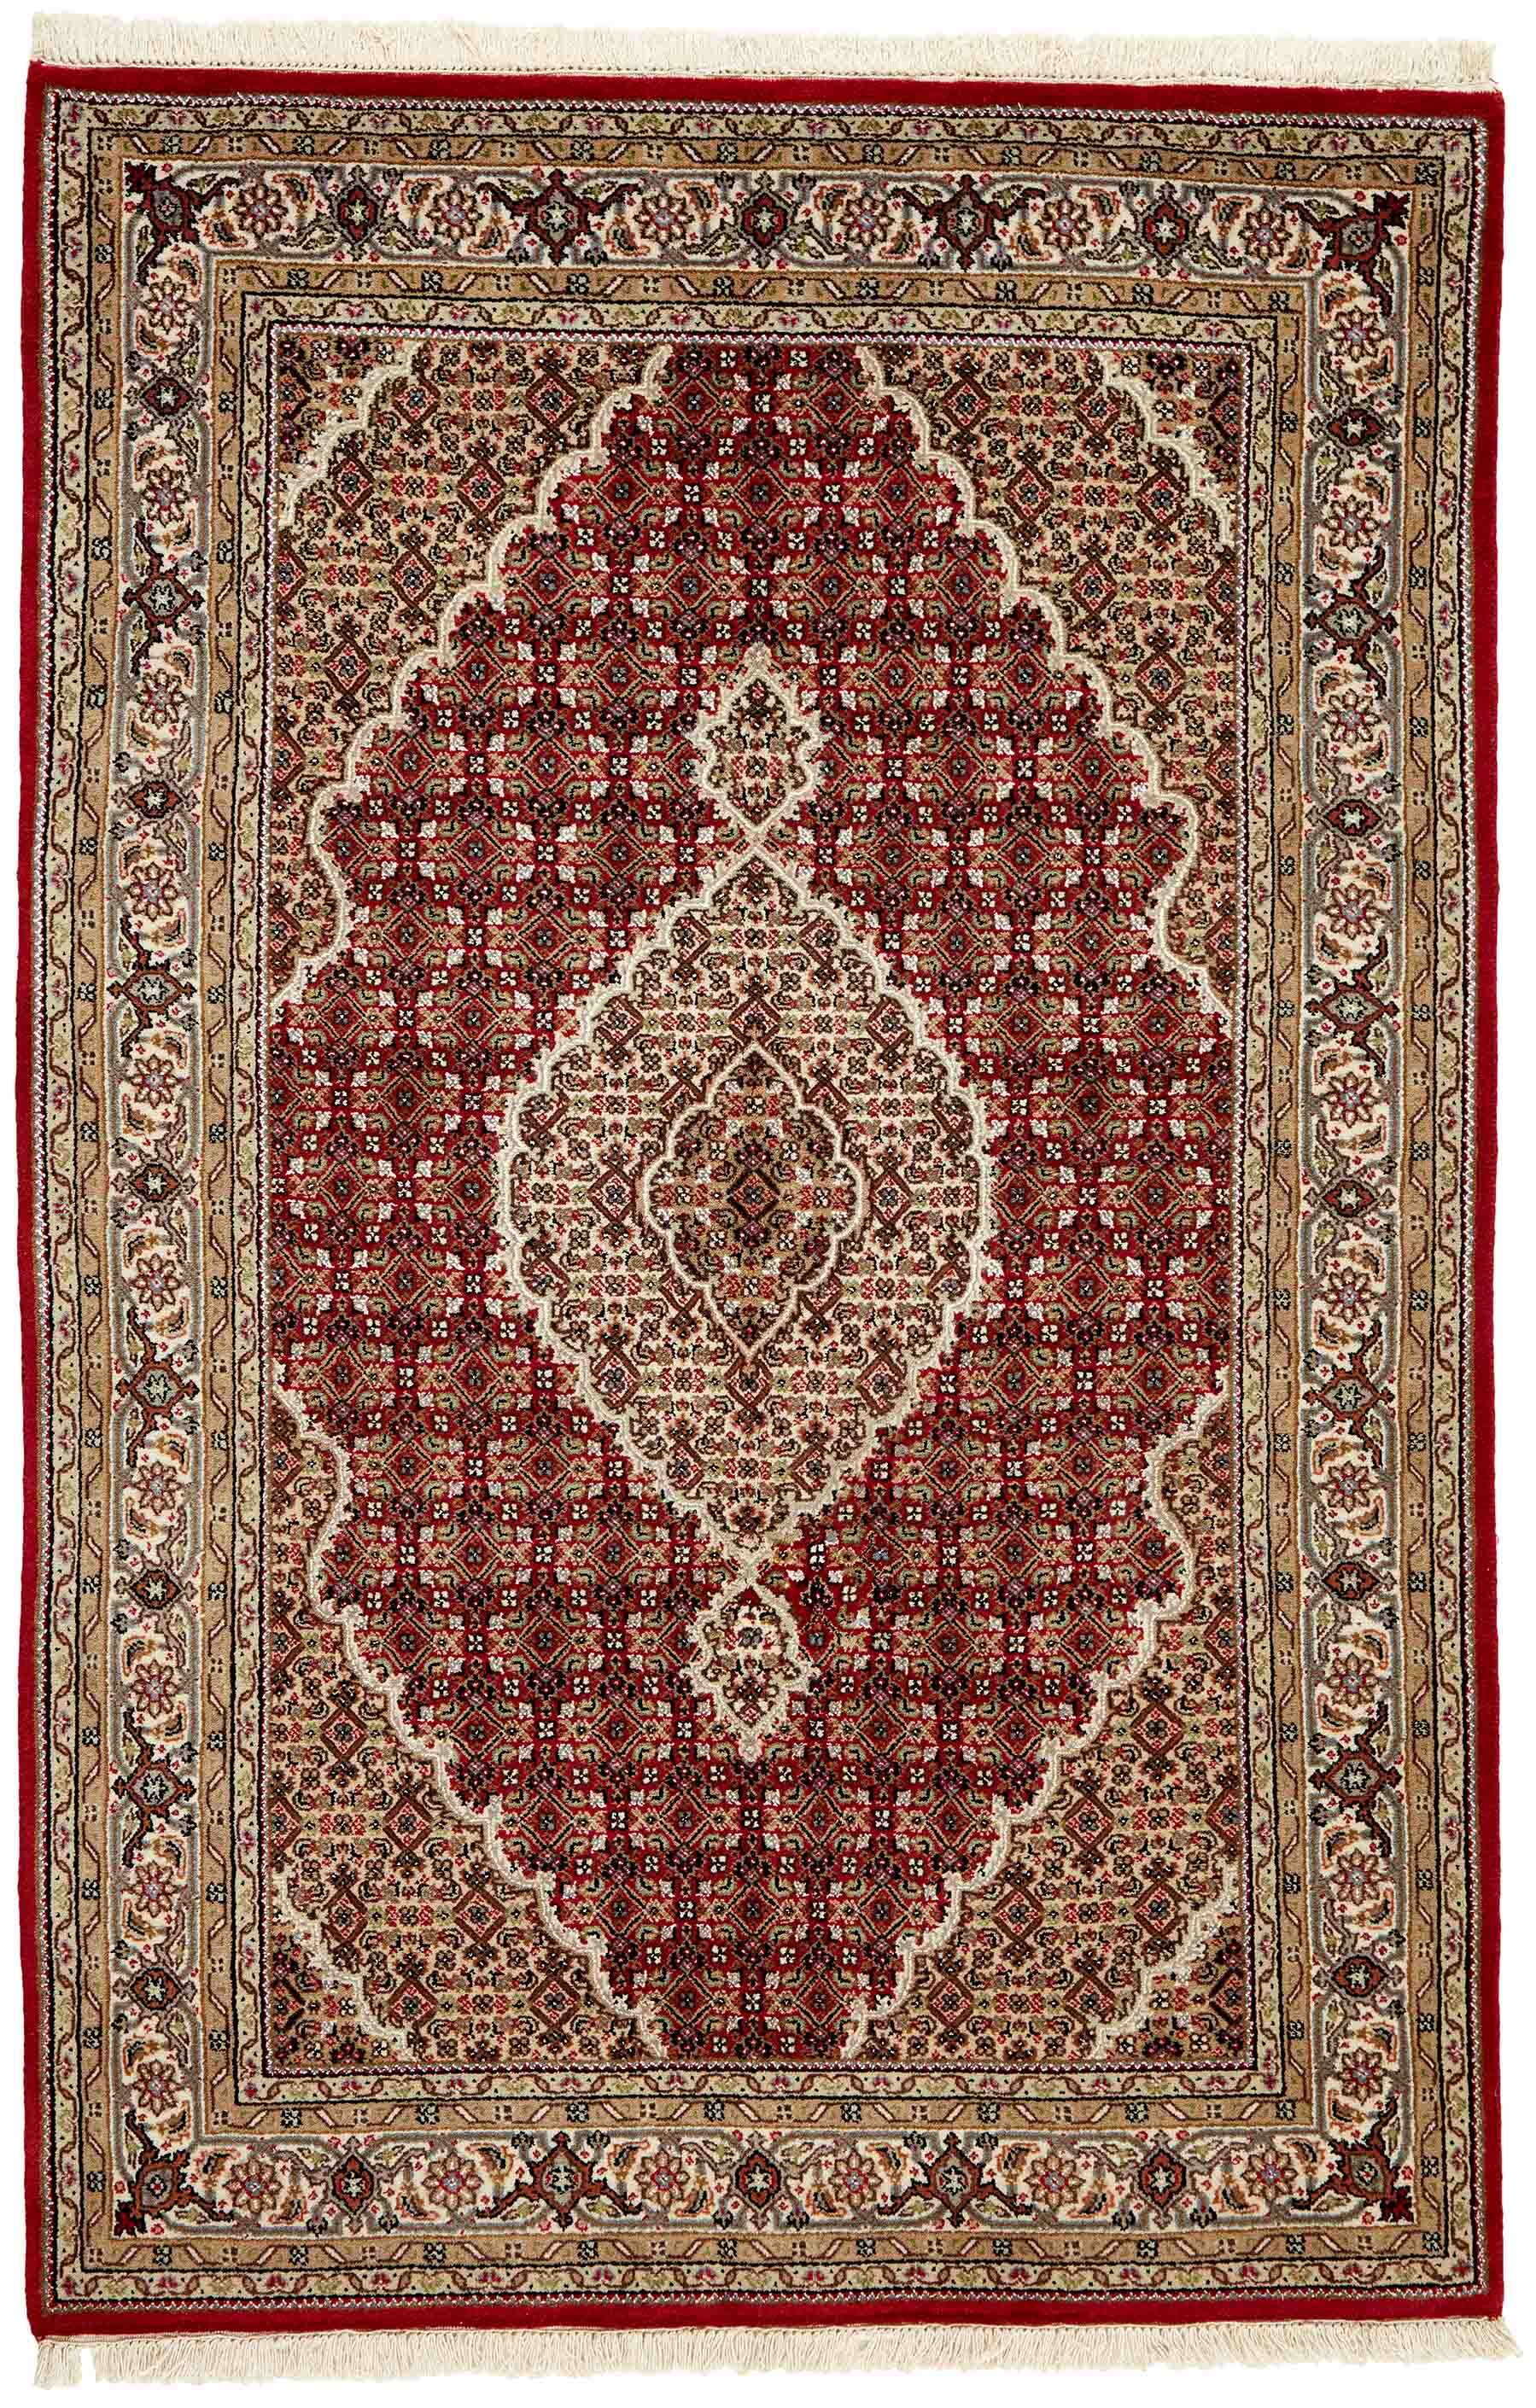 Authentic Oriental rug with traditional geometric and floral design in red